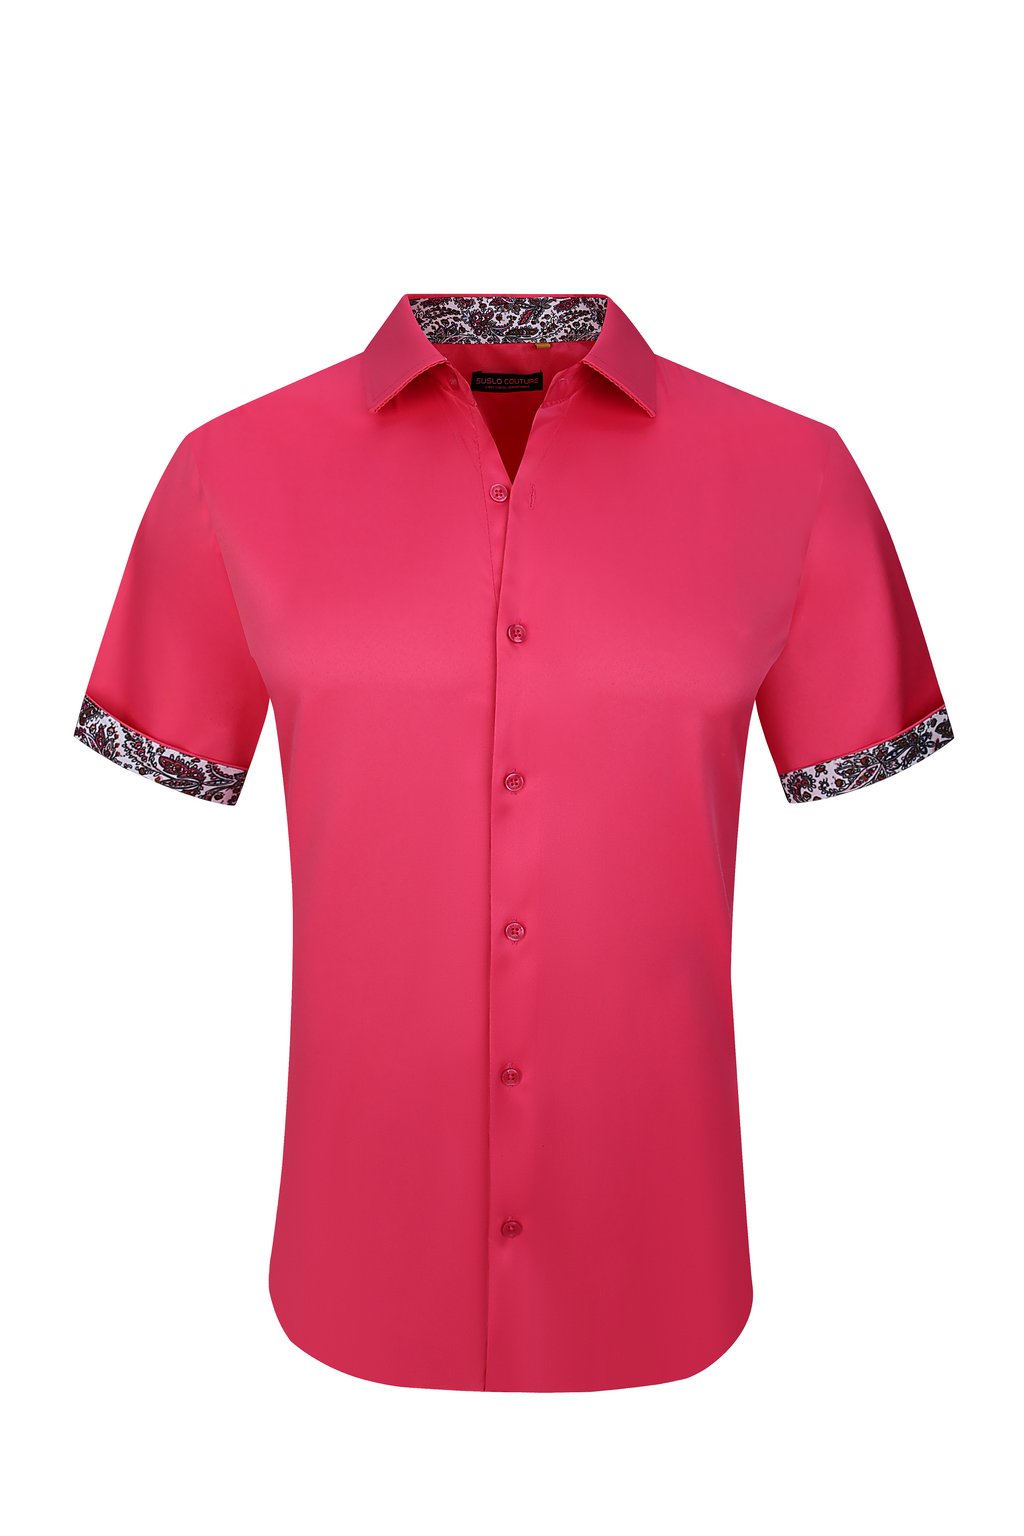 Suslo Solid 4 Way Stretch Short Sleeve Shirt - Fucsia – Suslo Couture